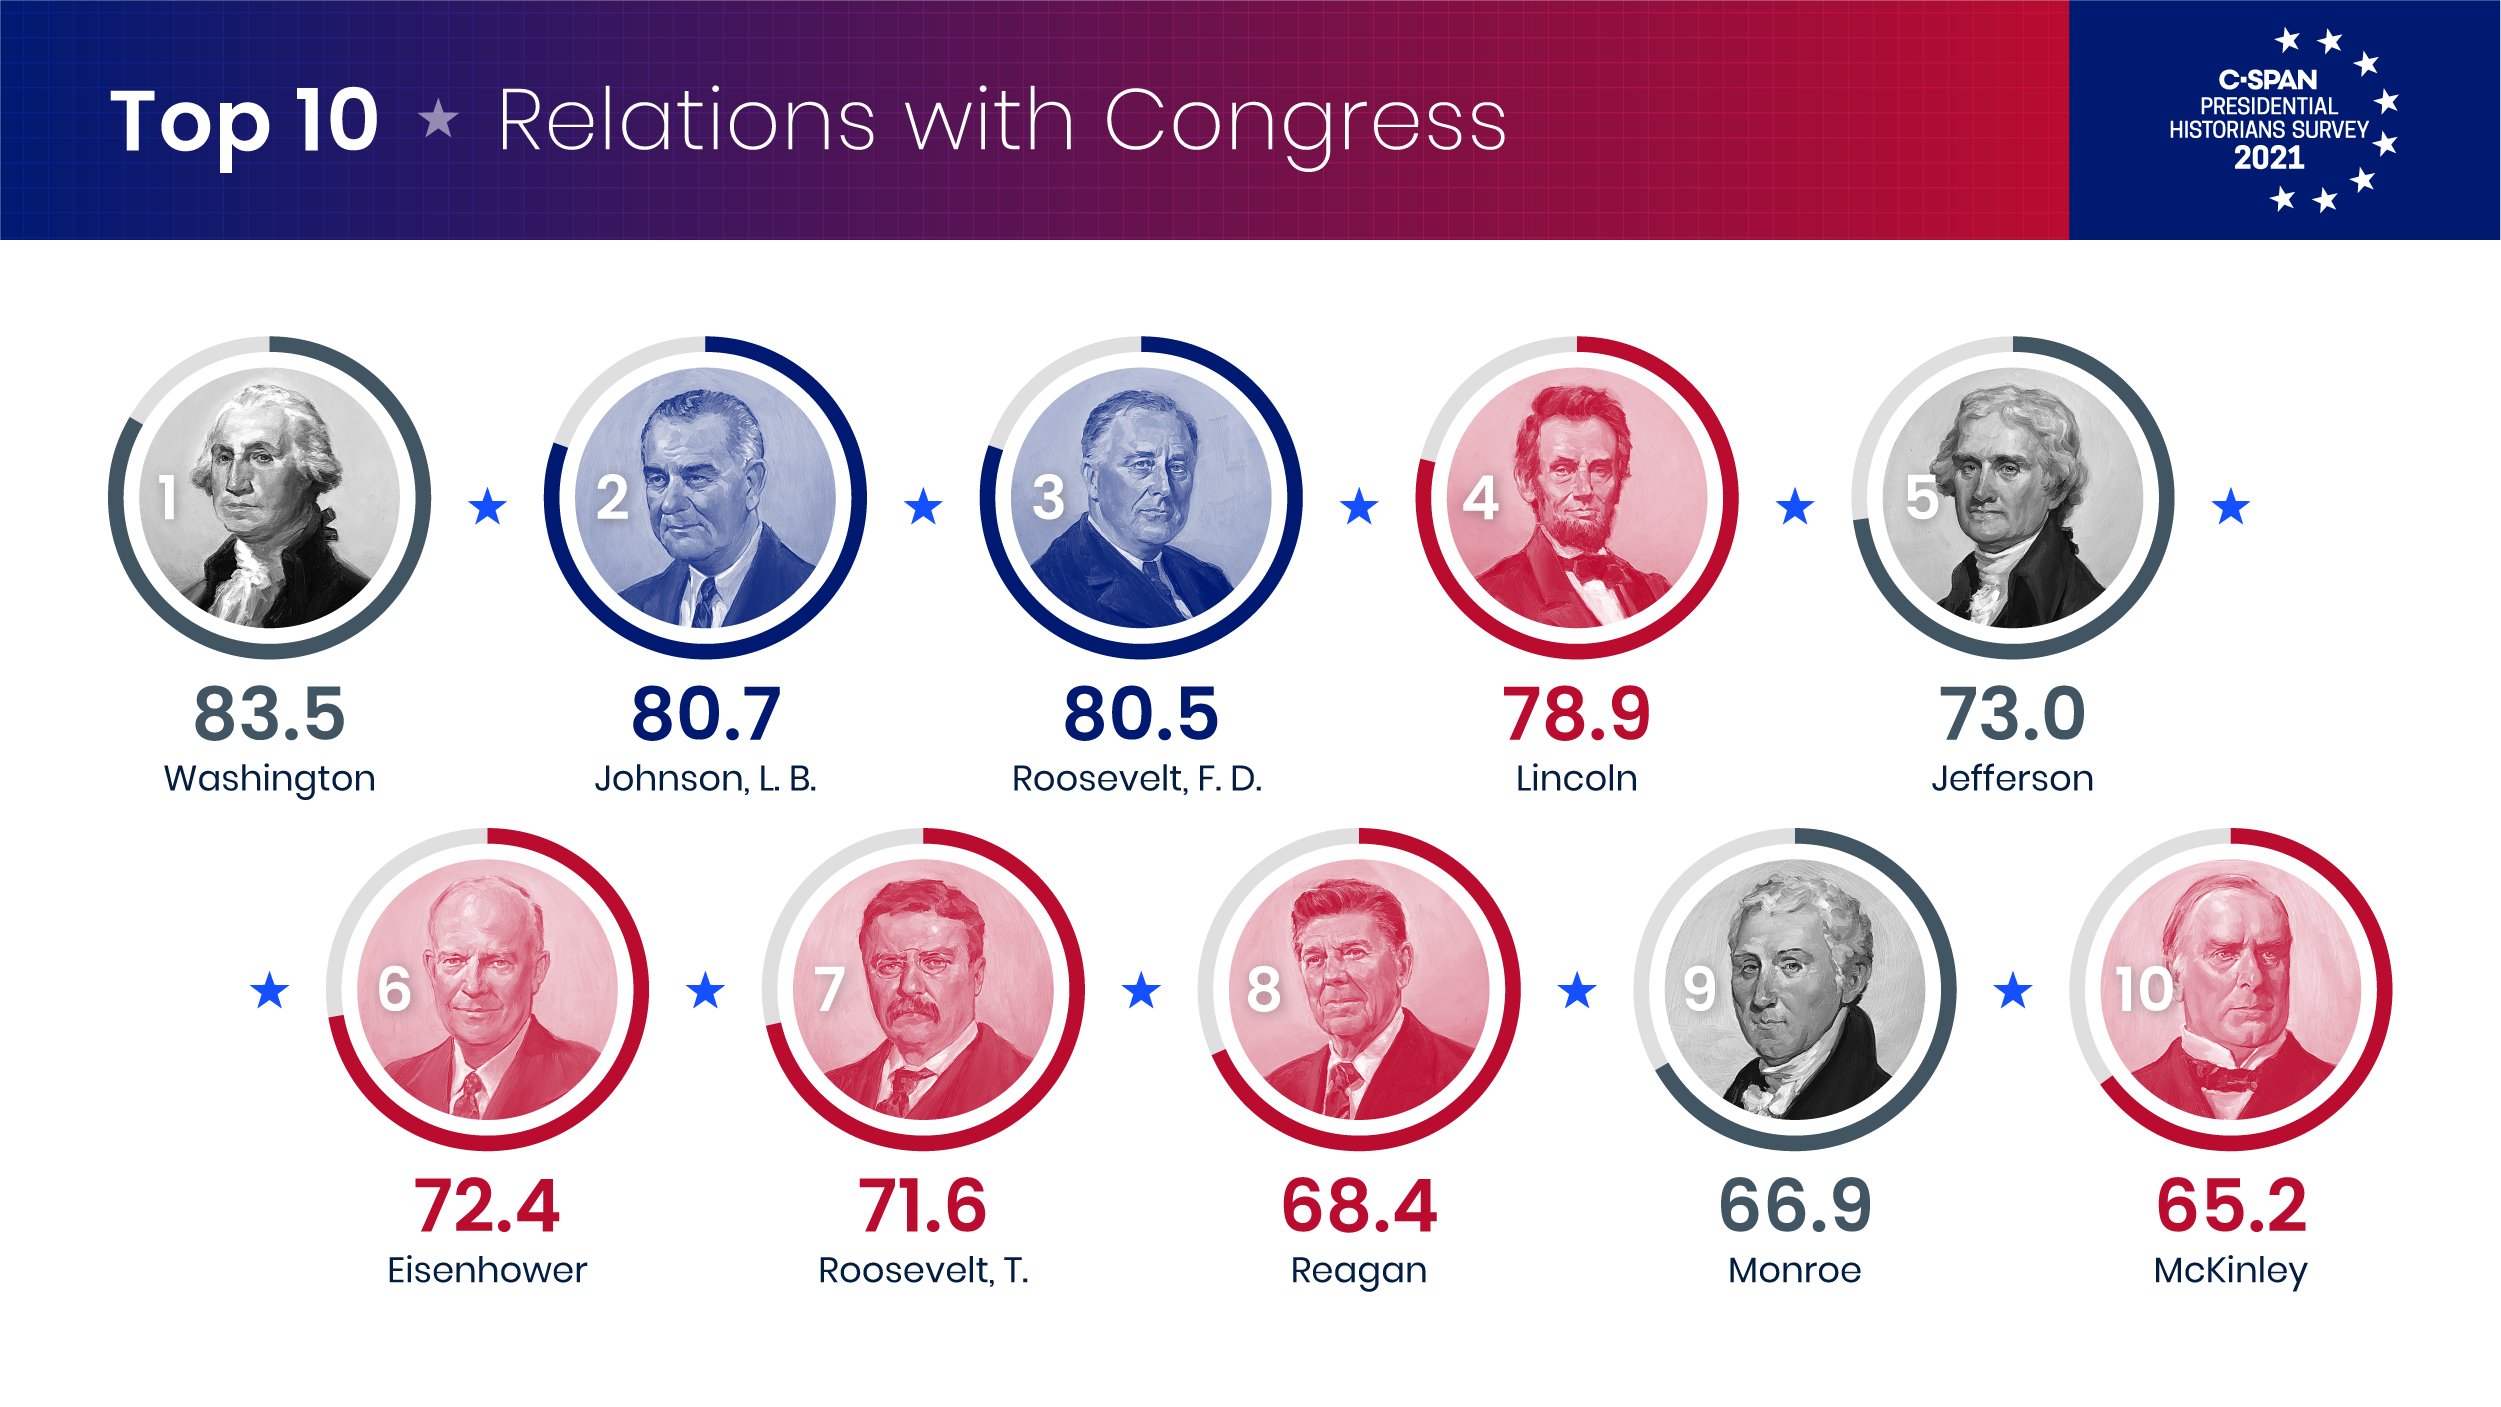 CSPAN on Twitter: "C-SPAN's 2021 Historians of Presidential Leadership Top 10: Relations with Congress https://t.co/51PjAx6Wai #cspanPOTUSsurvey https://t.co/LYUhxxacCf" / Twitter